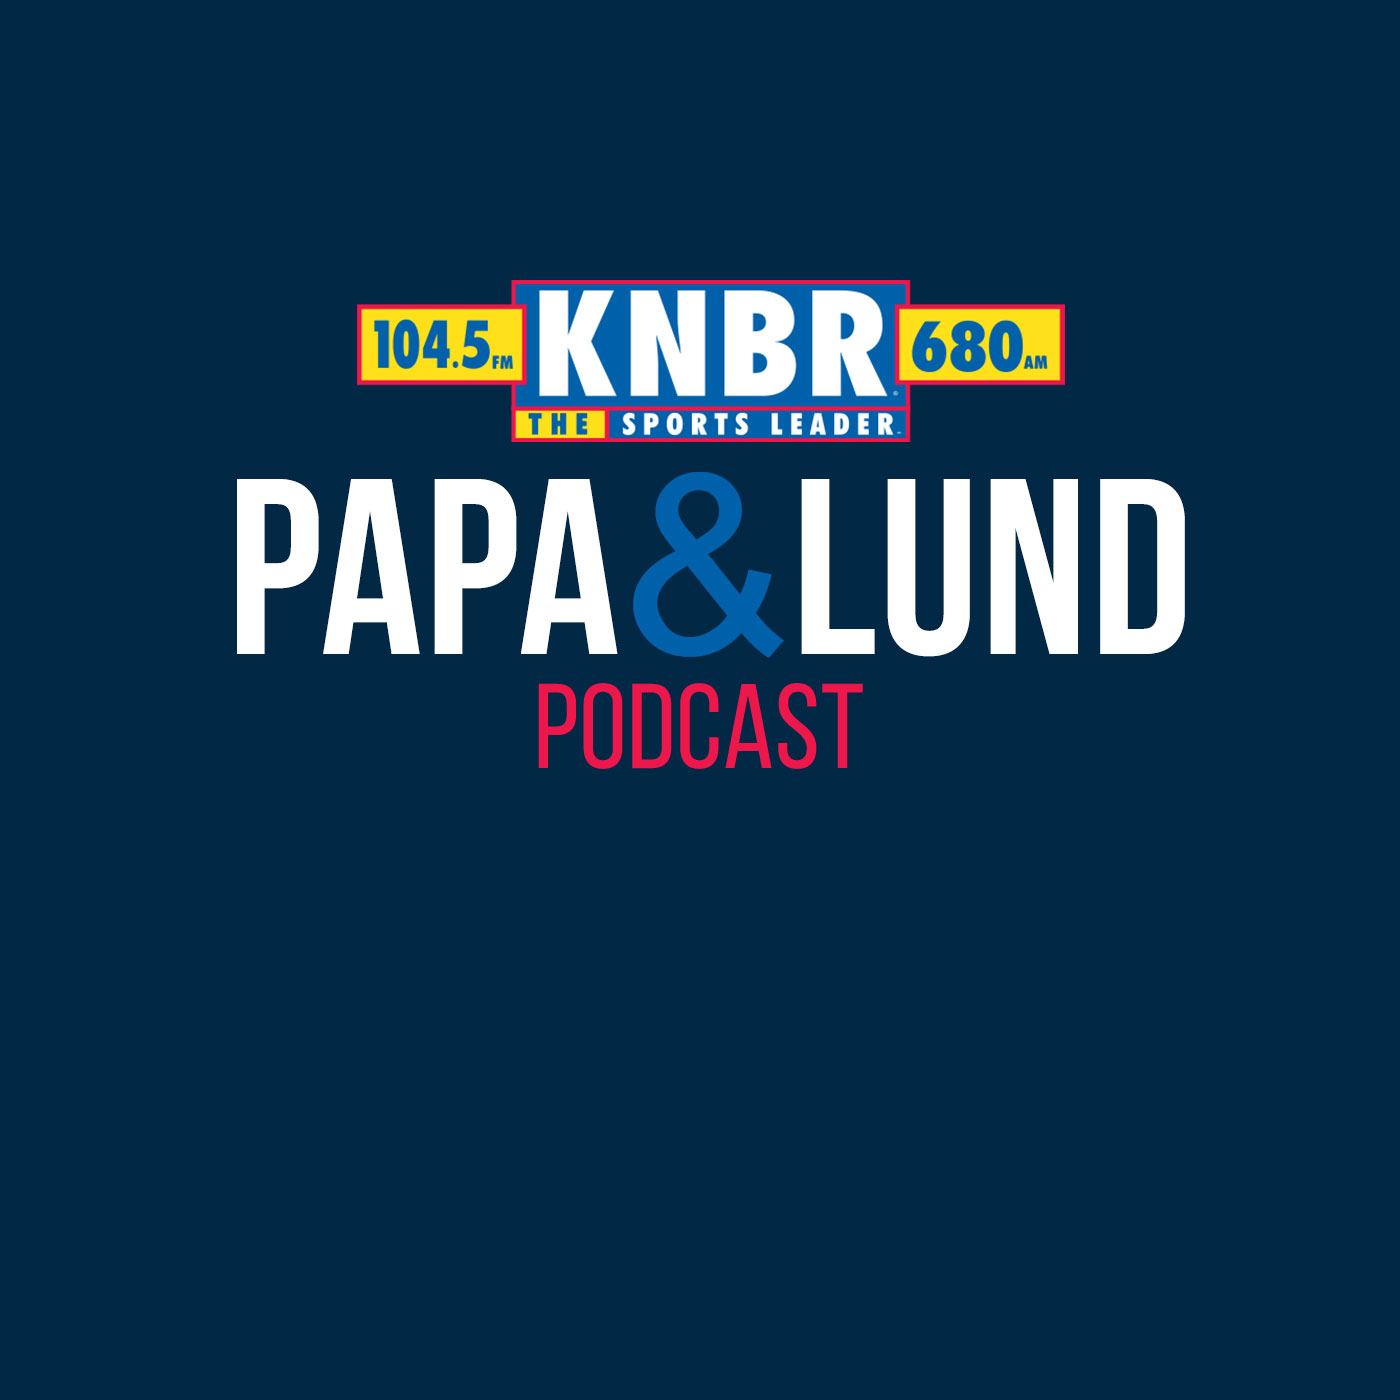 6-22 Ed Montague joins Papa & Lund to break down the recent controversial plays at the plate due to the Buster Posey rule